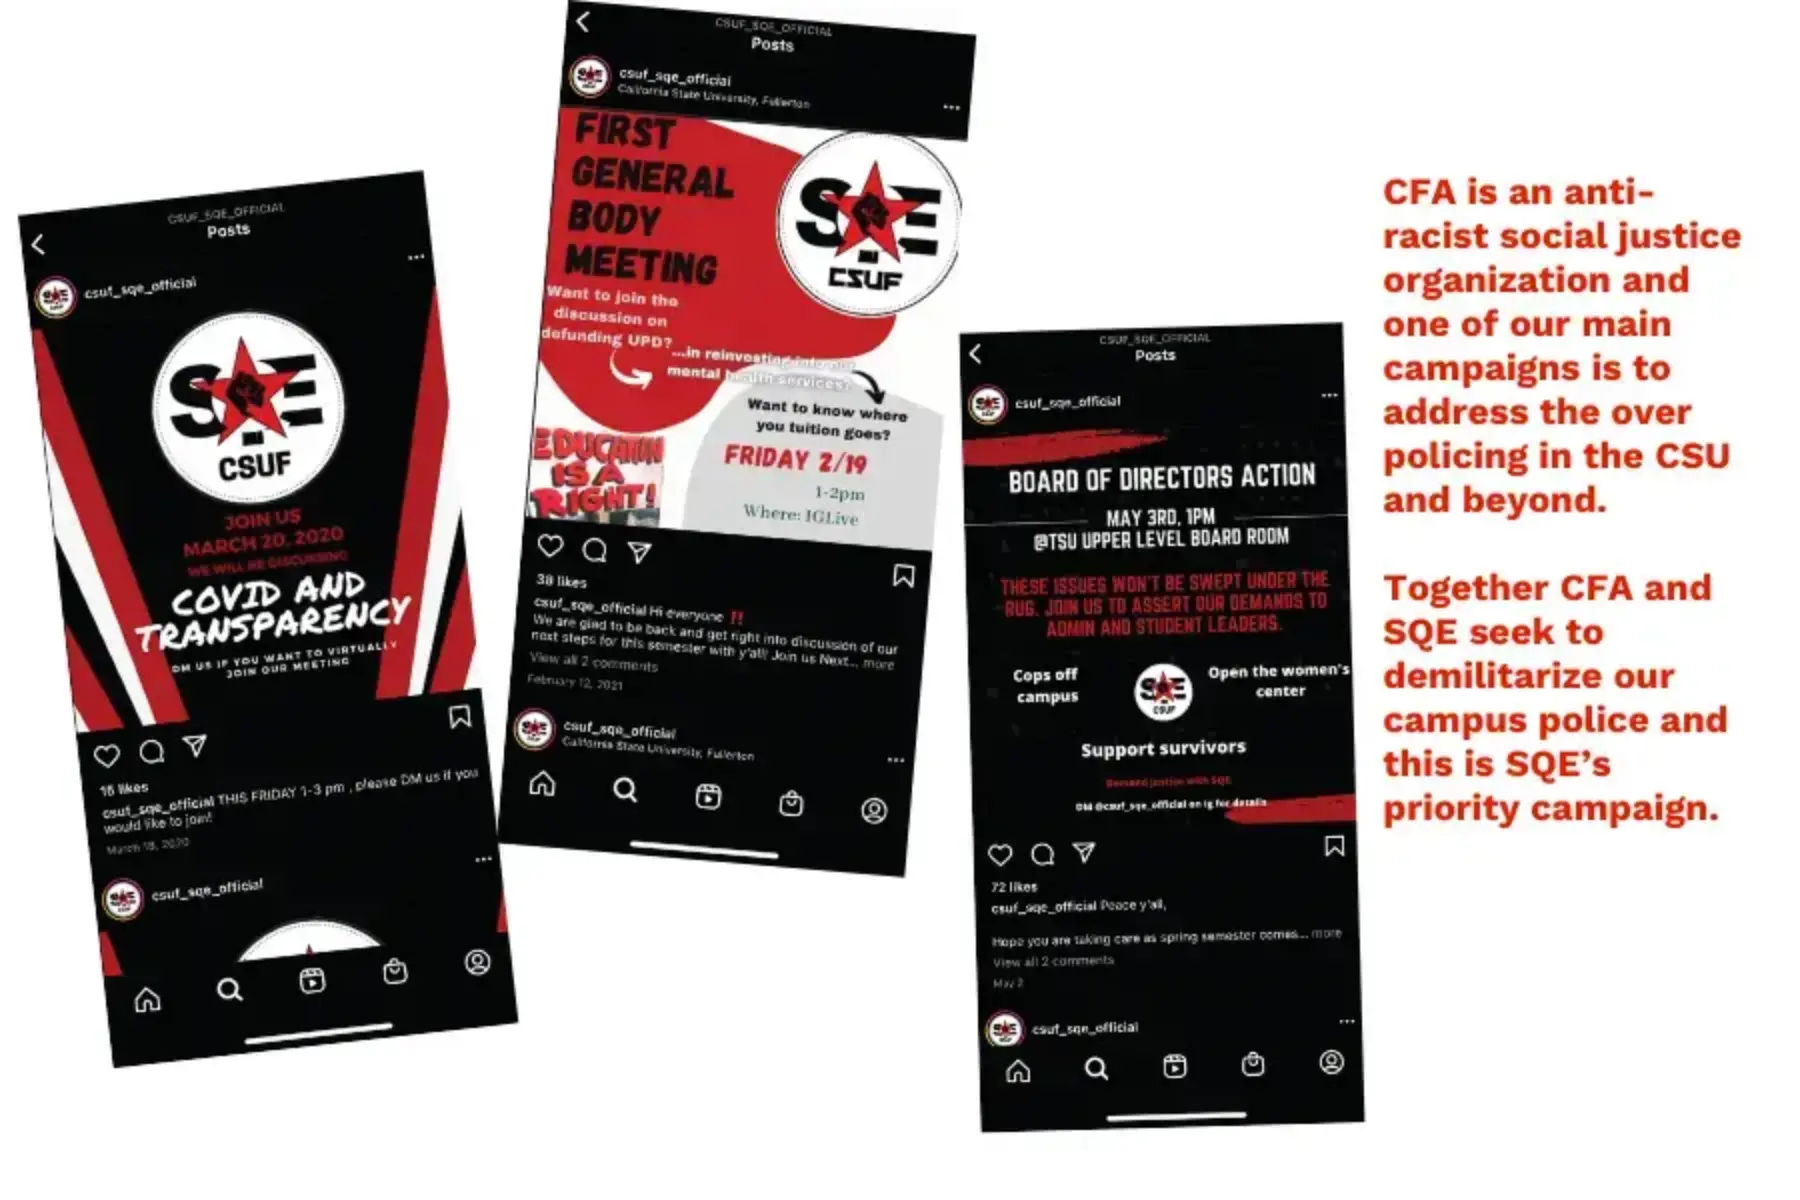 White background with three screenshots of SQE Instagram posts with black, red and white coloring. Th first screenshot features an invitation for a COVID and transparency townhall meeting. The second screenshot features red and gray shapes advertising a first general body meeting with a sign reading education is a right. The third screenshot is calling on students to turn out to a Board of Directors action. To the right of the screenshots is red text that reads CFA is an anti-racist social justice organization and one of our main campaigns is to address the over policing in the CSU and beyond. Together CFA and SQE seek to demilitarize our campus police and this is SQE’s priority campaign.